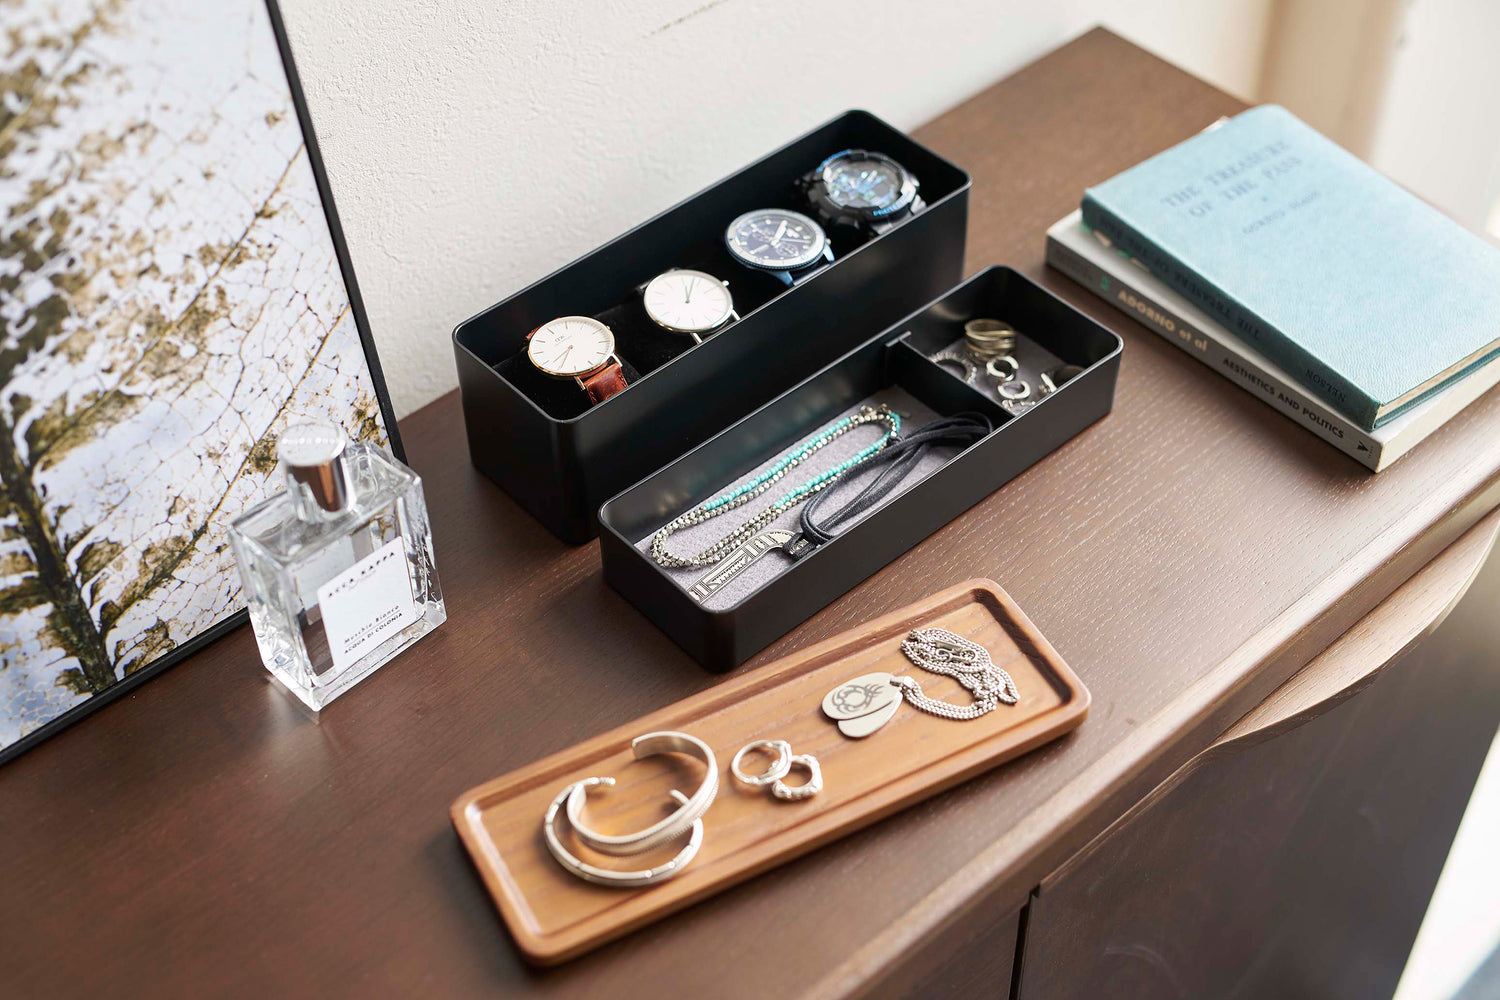 View 30 - Black Stacking Watch and Accessory Case opened on a dresser